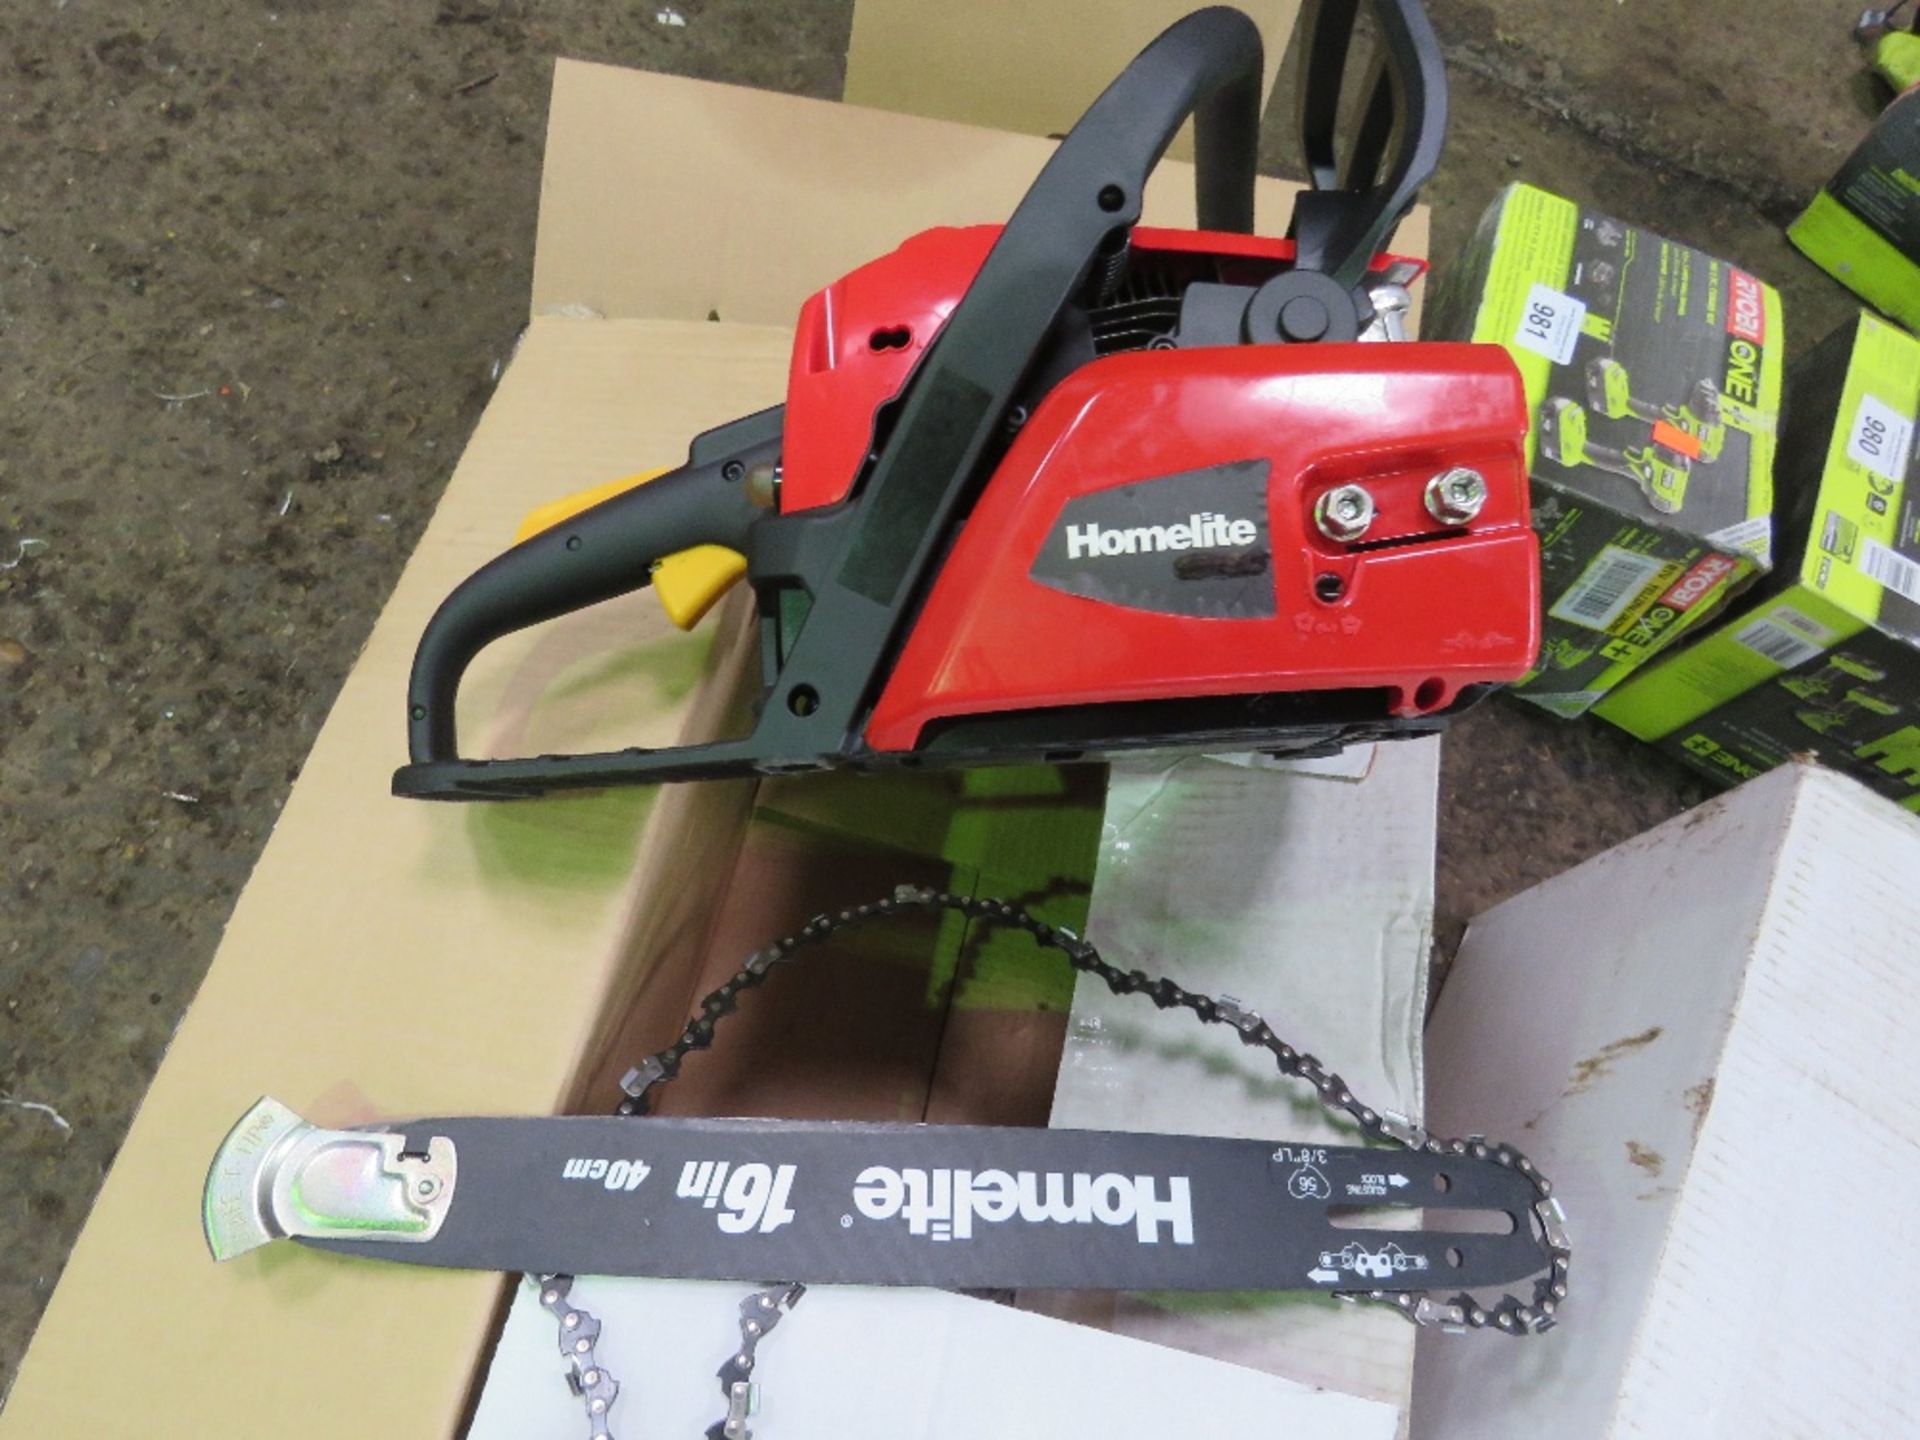 HOMELITE 42CC PETROL ENGINED CHAINSAW WITH 16" BAR, BOXED. - Image 2 of 3